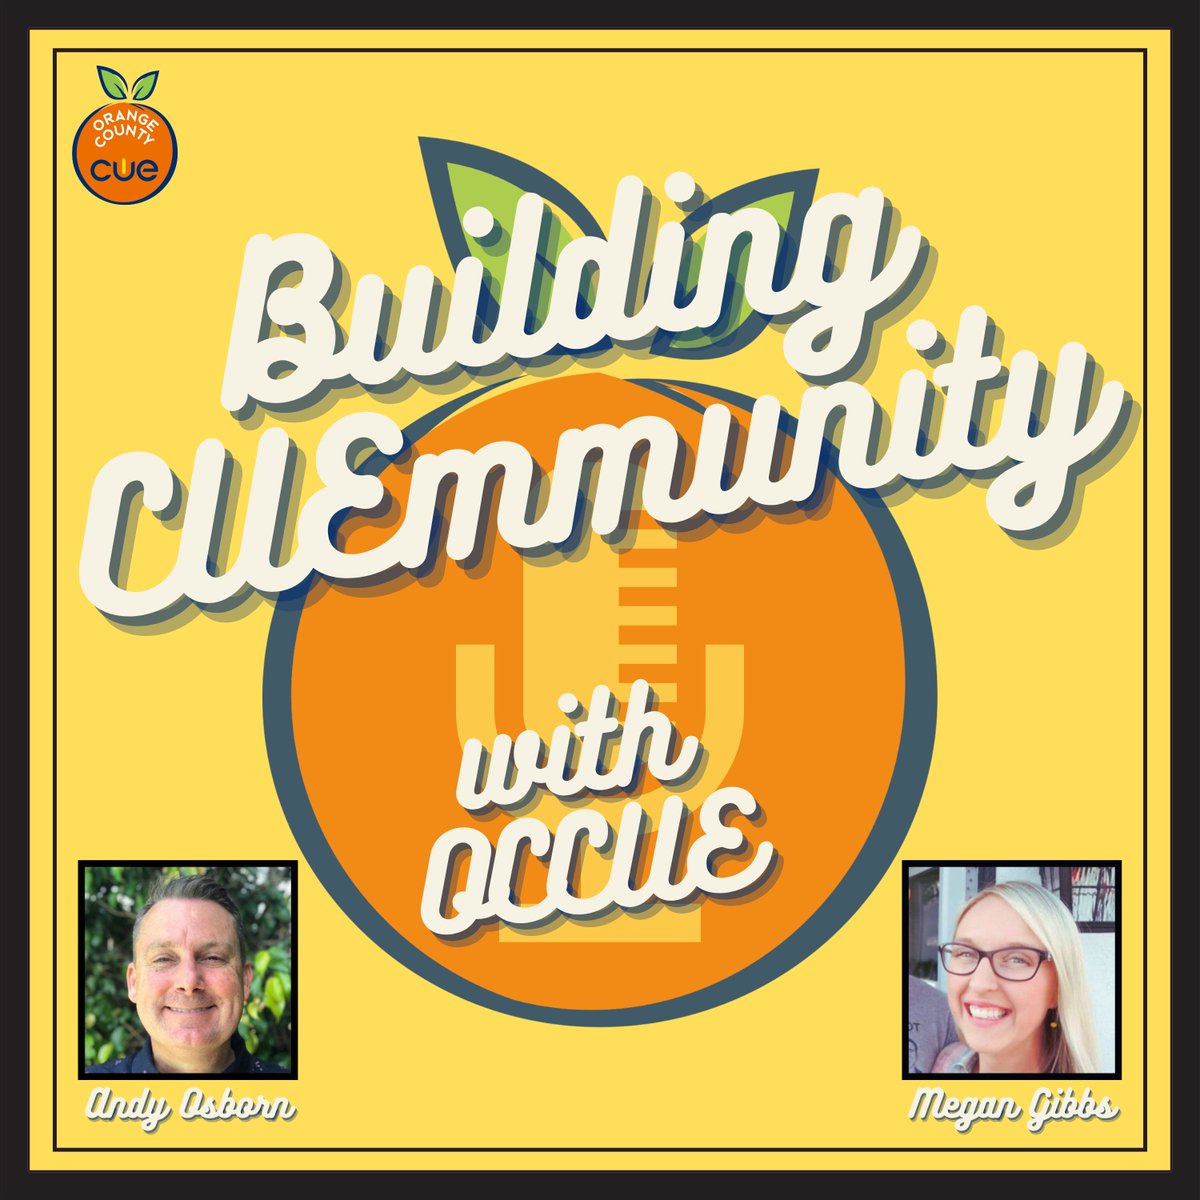 The 2nd episode of 'Building CUE-mmunity with OCCUE' just dropped! Our very own OCCUE Secretary Megan Gibbs is the guest. You are not going to want to miss this! Listen and subscribe wherever you get your podcasts.😃 #OCCUE #WeAreCUE #BPSD #WestminsterSD